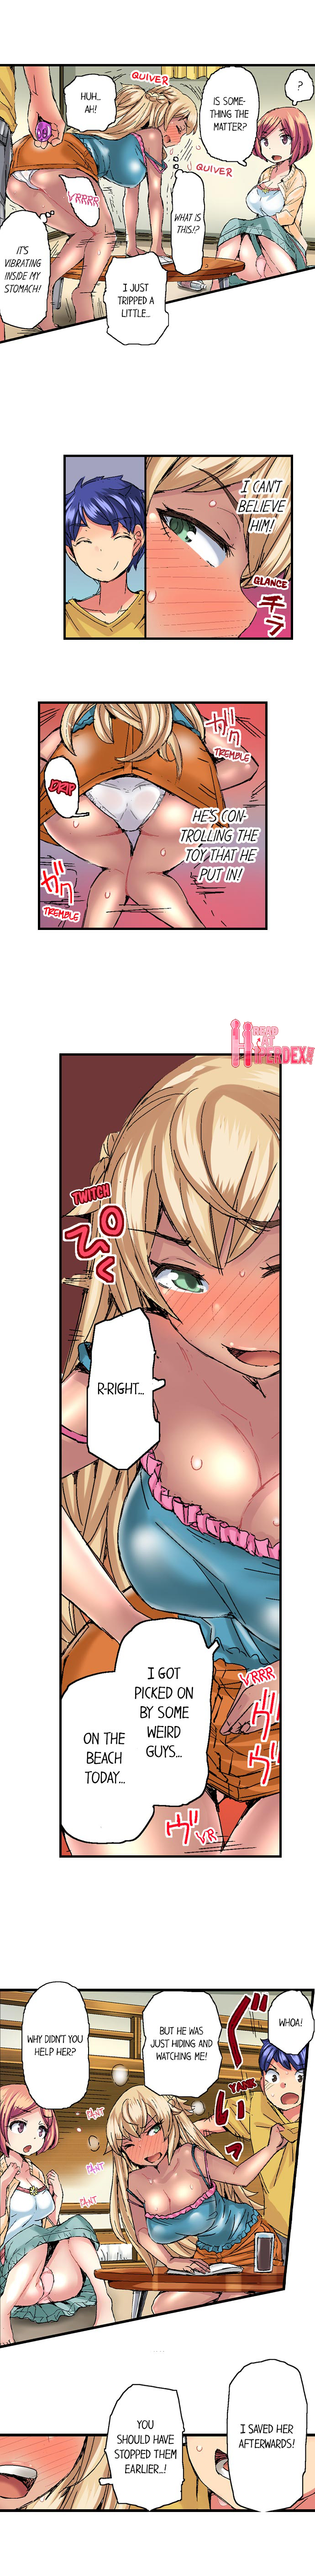 Taking a Hot Tanned Chick’s Virginity - Chapter 19 Page 7